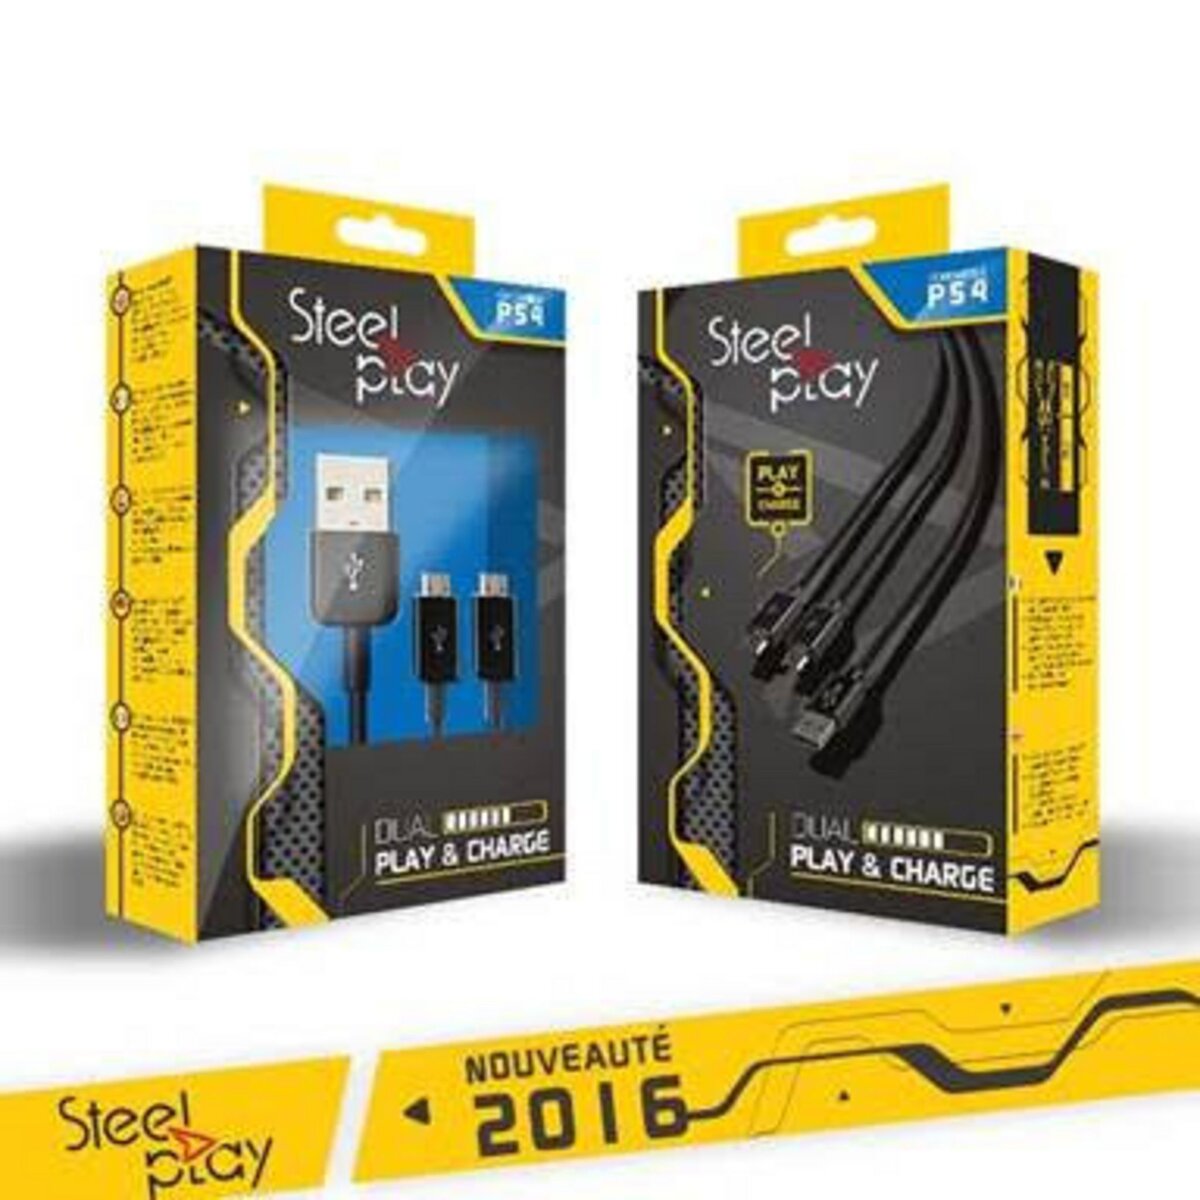 STEELPLAY Cable manette double charge et jeu PS4 pas cher 